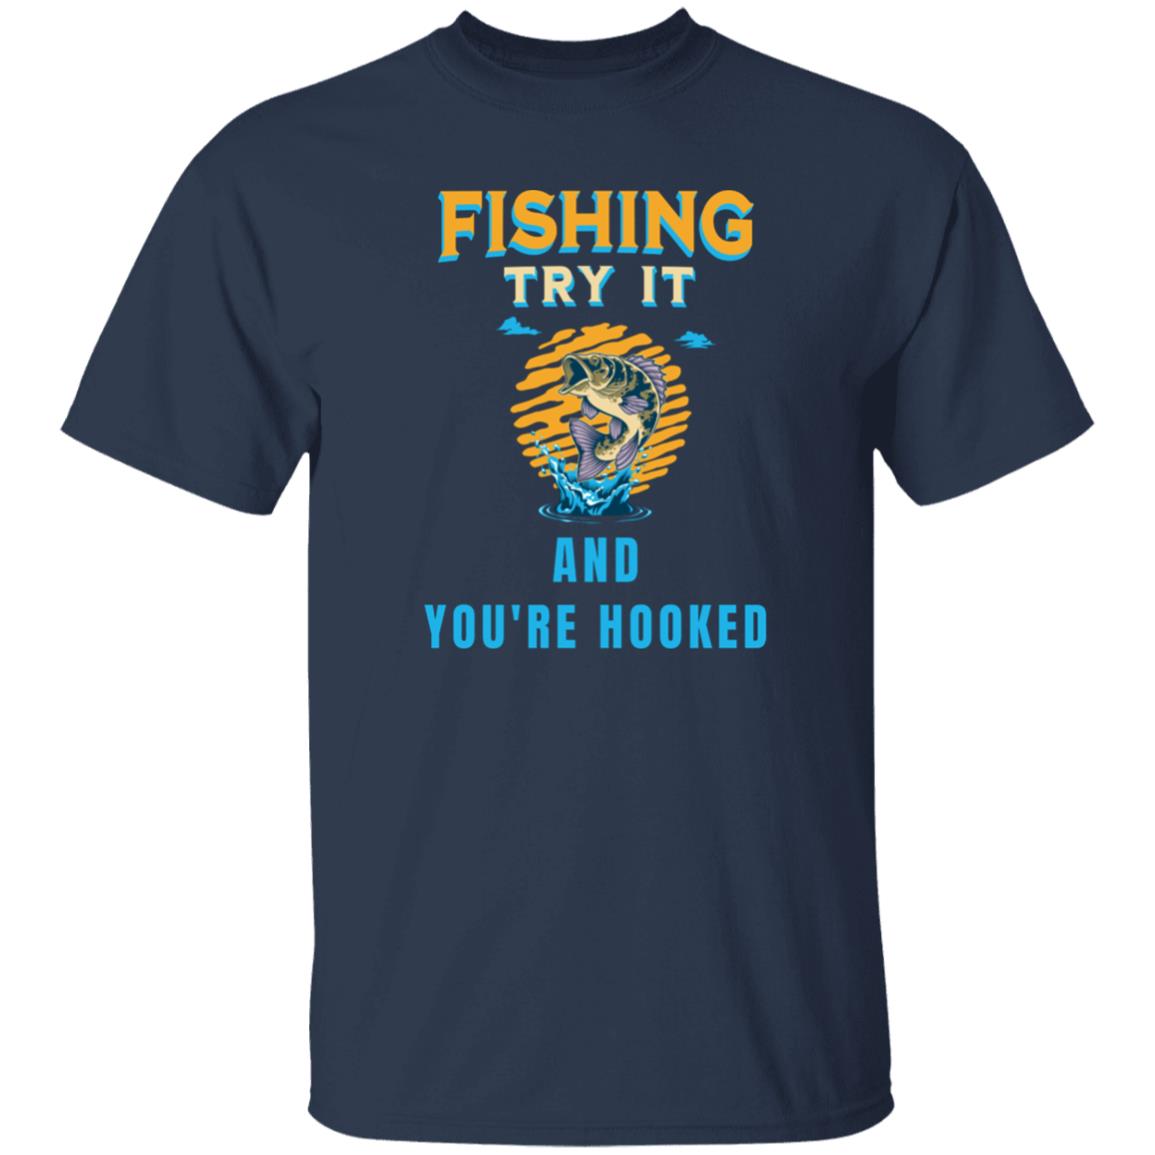 Fishing try it and you're hooked k t-shirt navy